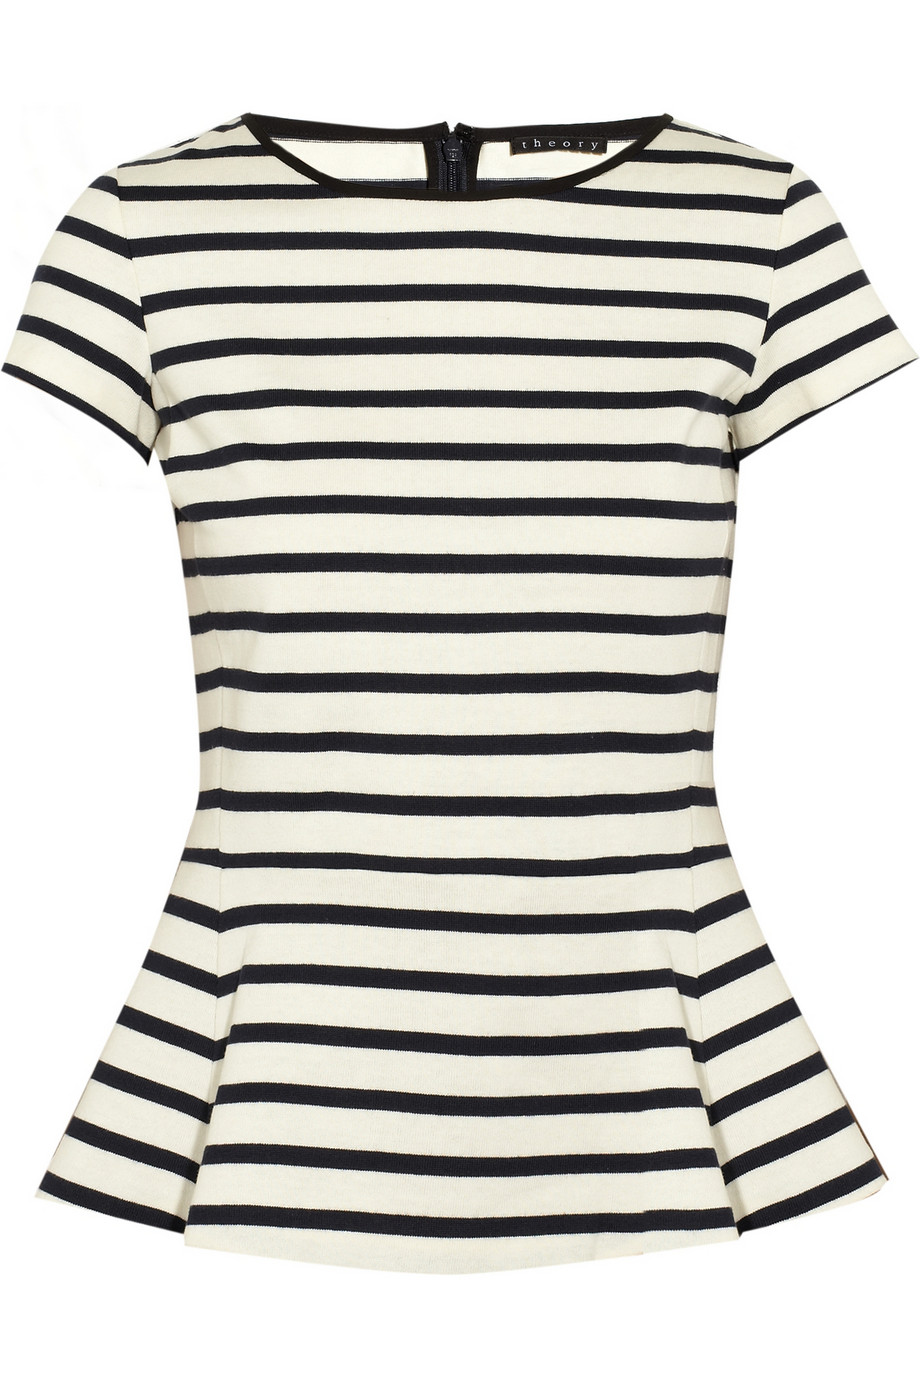 Theory Panna Stripe Peplum Top in Natural | Lyst